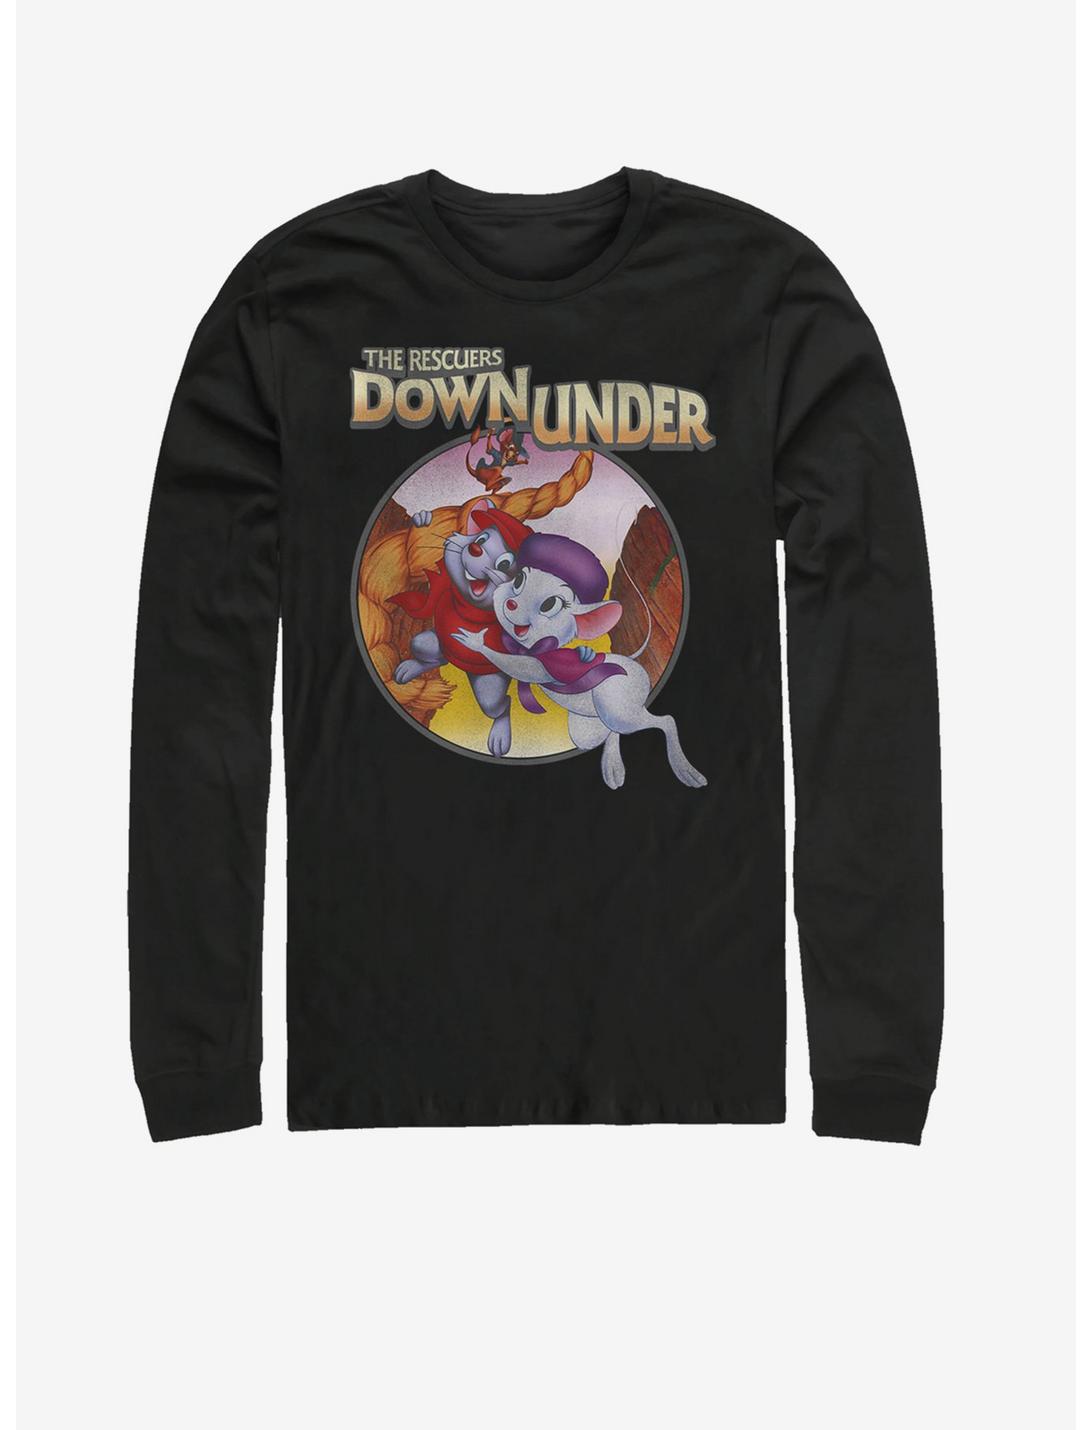 Disney The Rescuers Down Under Rescued Long-Sleeve T-Shirt, BLACK, hi-res